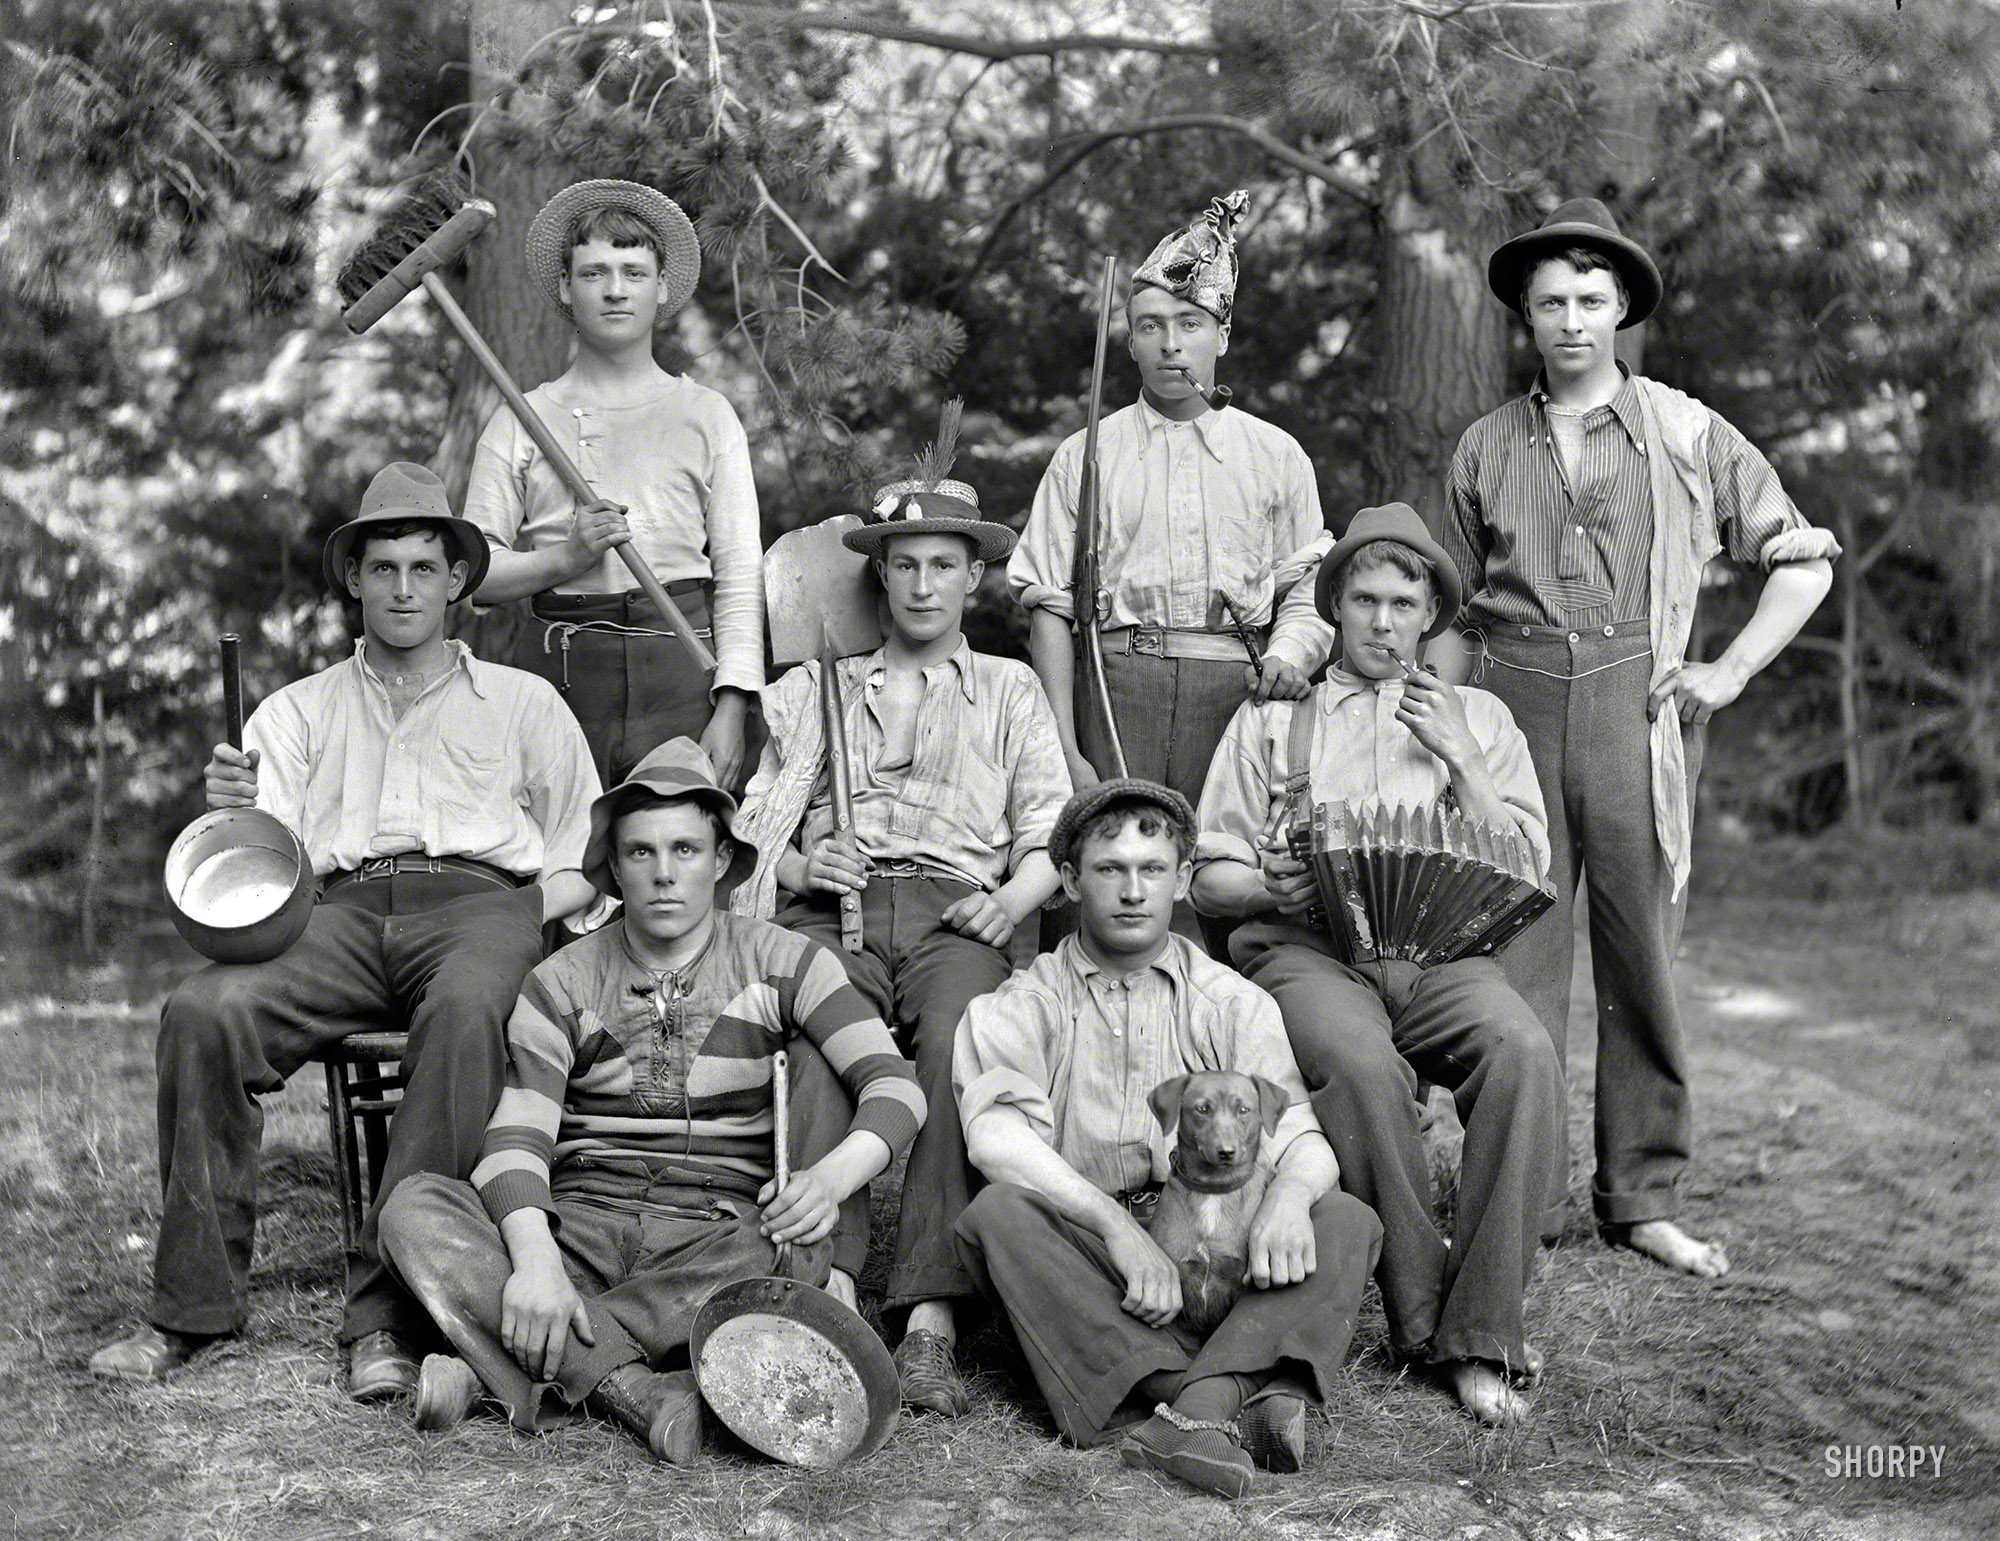 New Zealand circa 1905. "Eight young men in ragtag clothing with hats, pots, broom, shovel, accordion, pipes, gun and dog. Sumner, Christchurch." Five of these fun-loving hayseeds are the Myrtle Campers from this post. Glass negative by Adam Maclay, Alexander Turnbull Library. View full size.